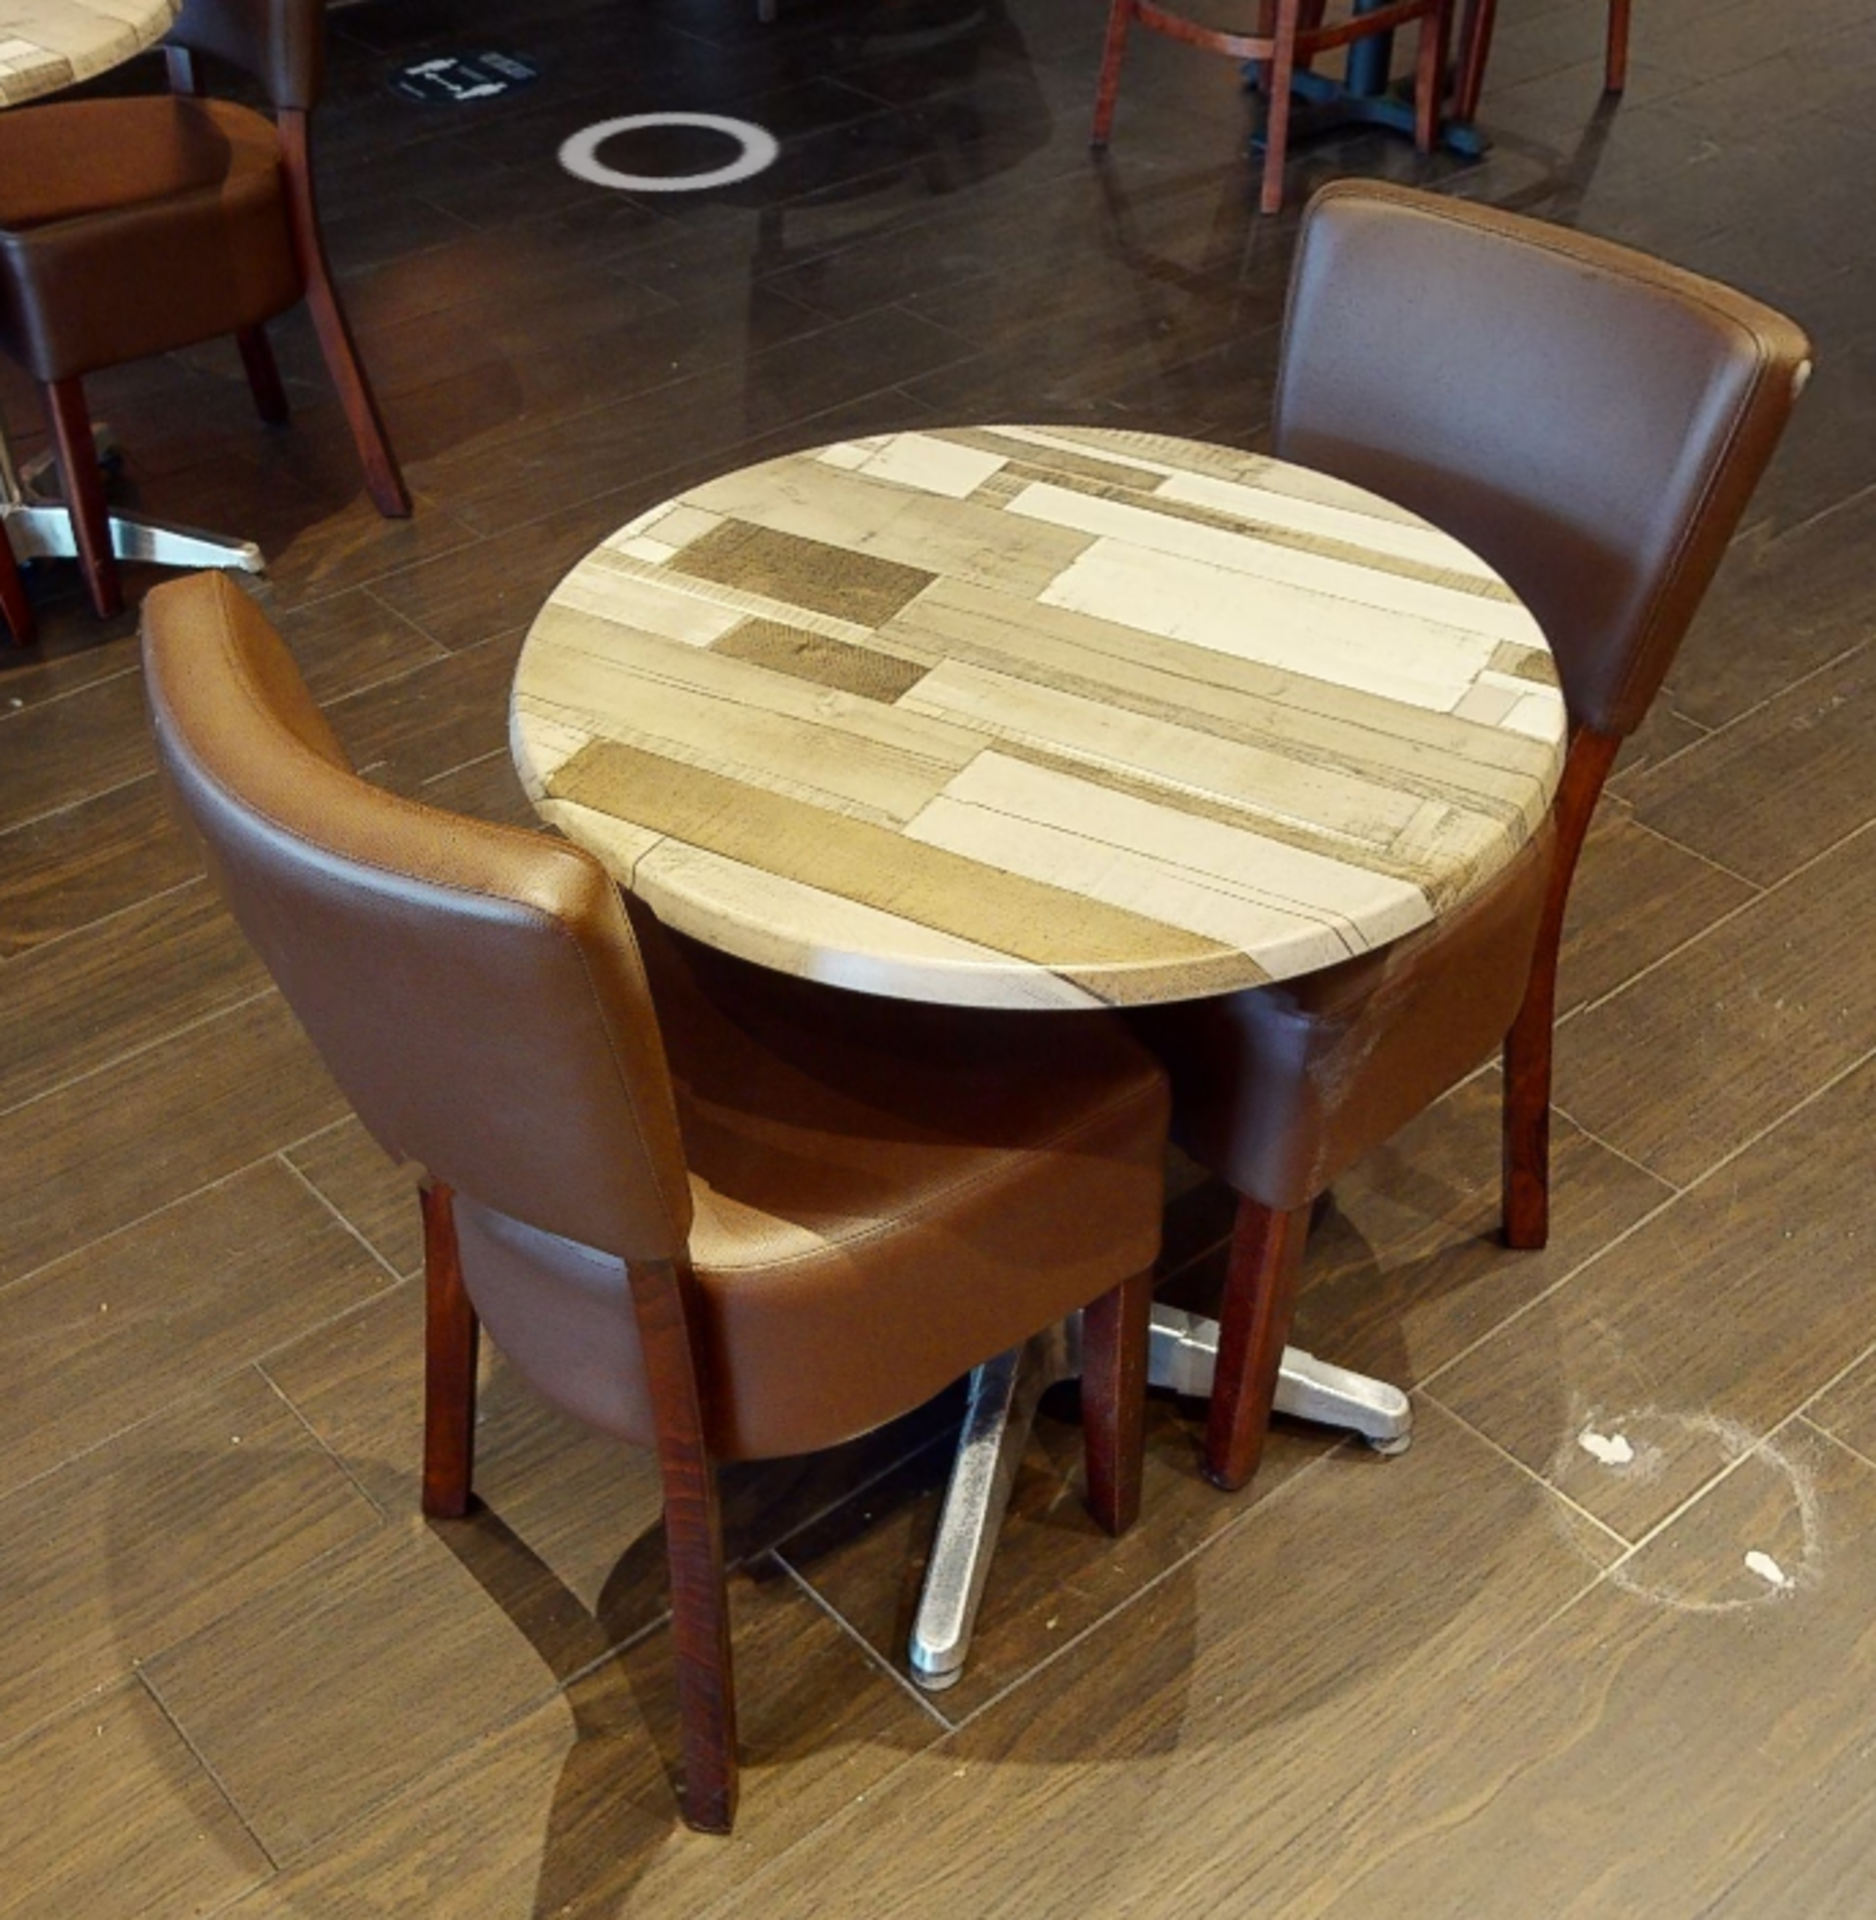 6 x Restaurant Chairs With Brown Leather Seat Pads and Padded Backrests - CL701 - Location: Ashton - Image 9 of 9